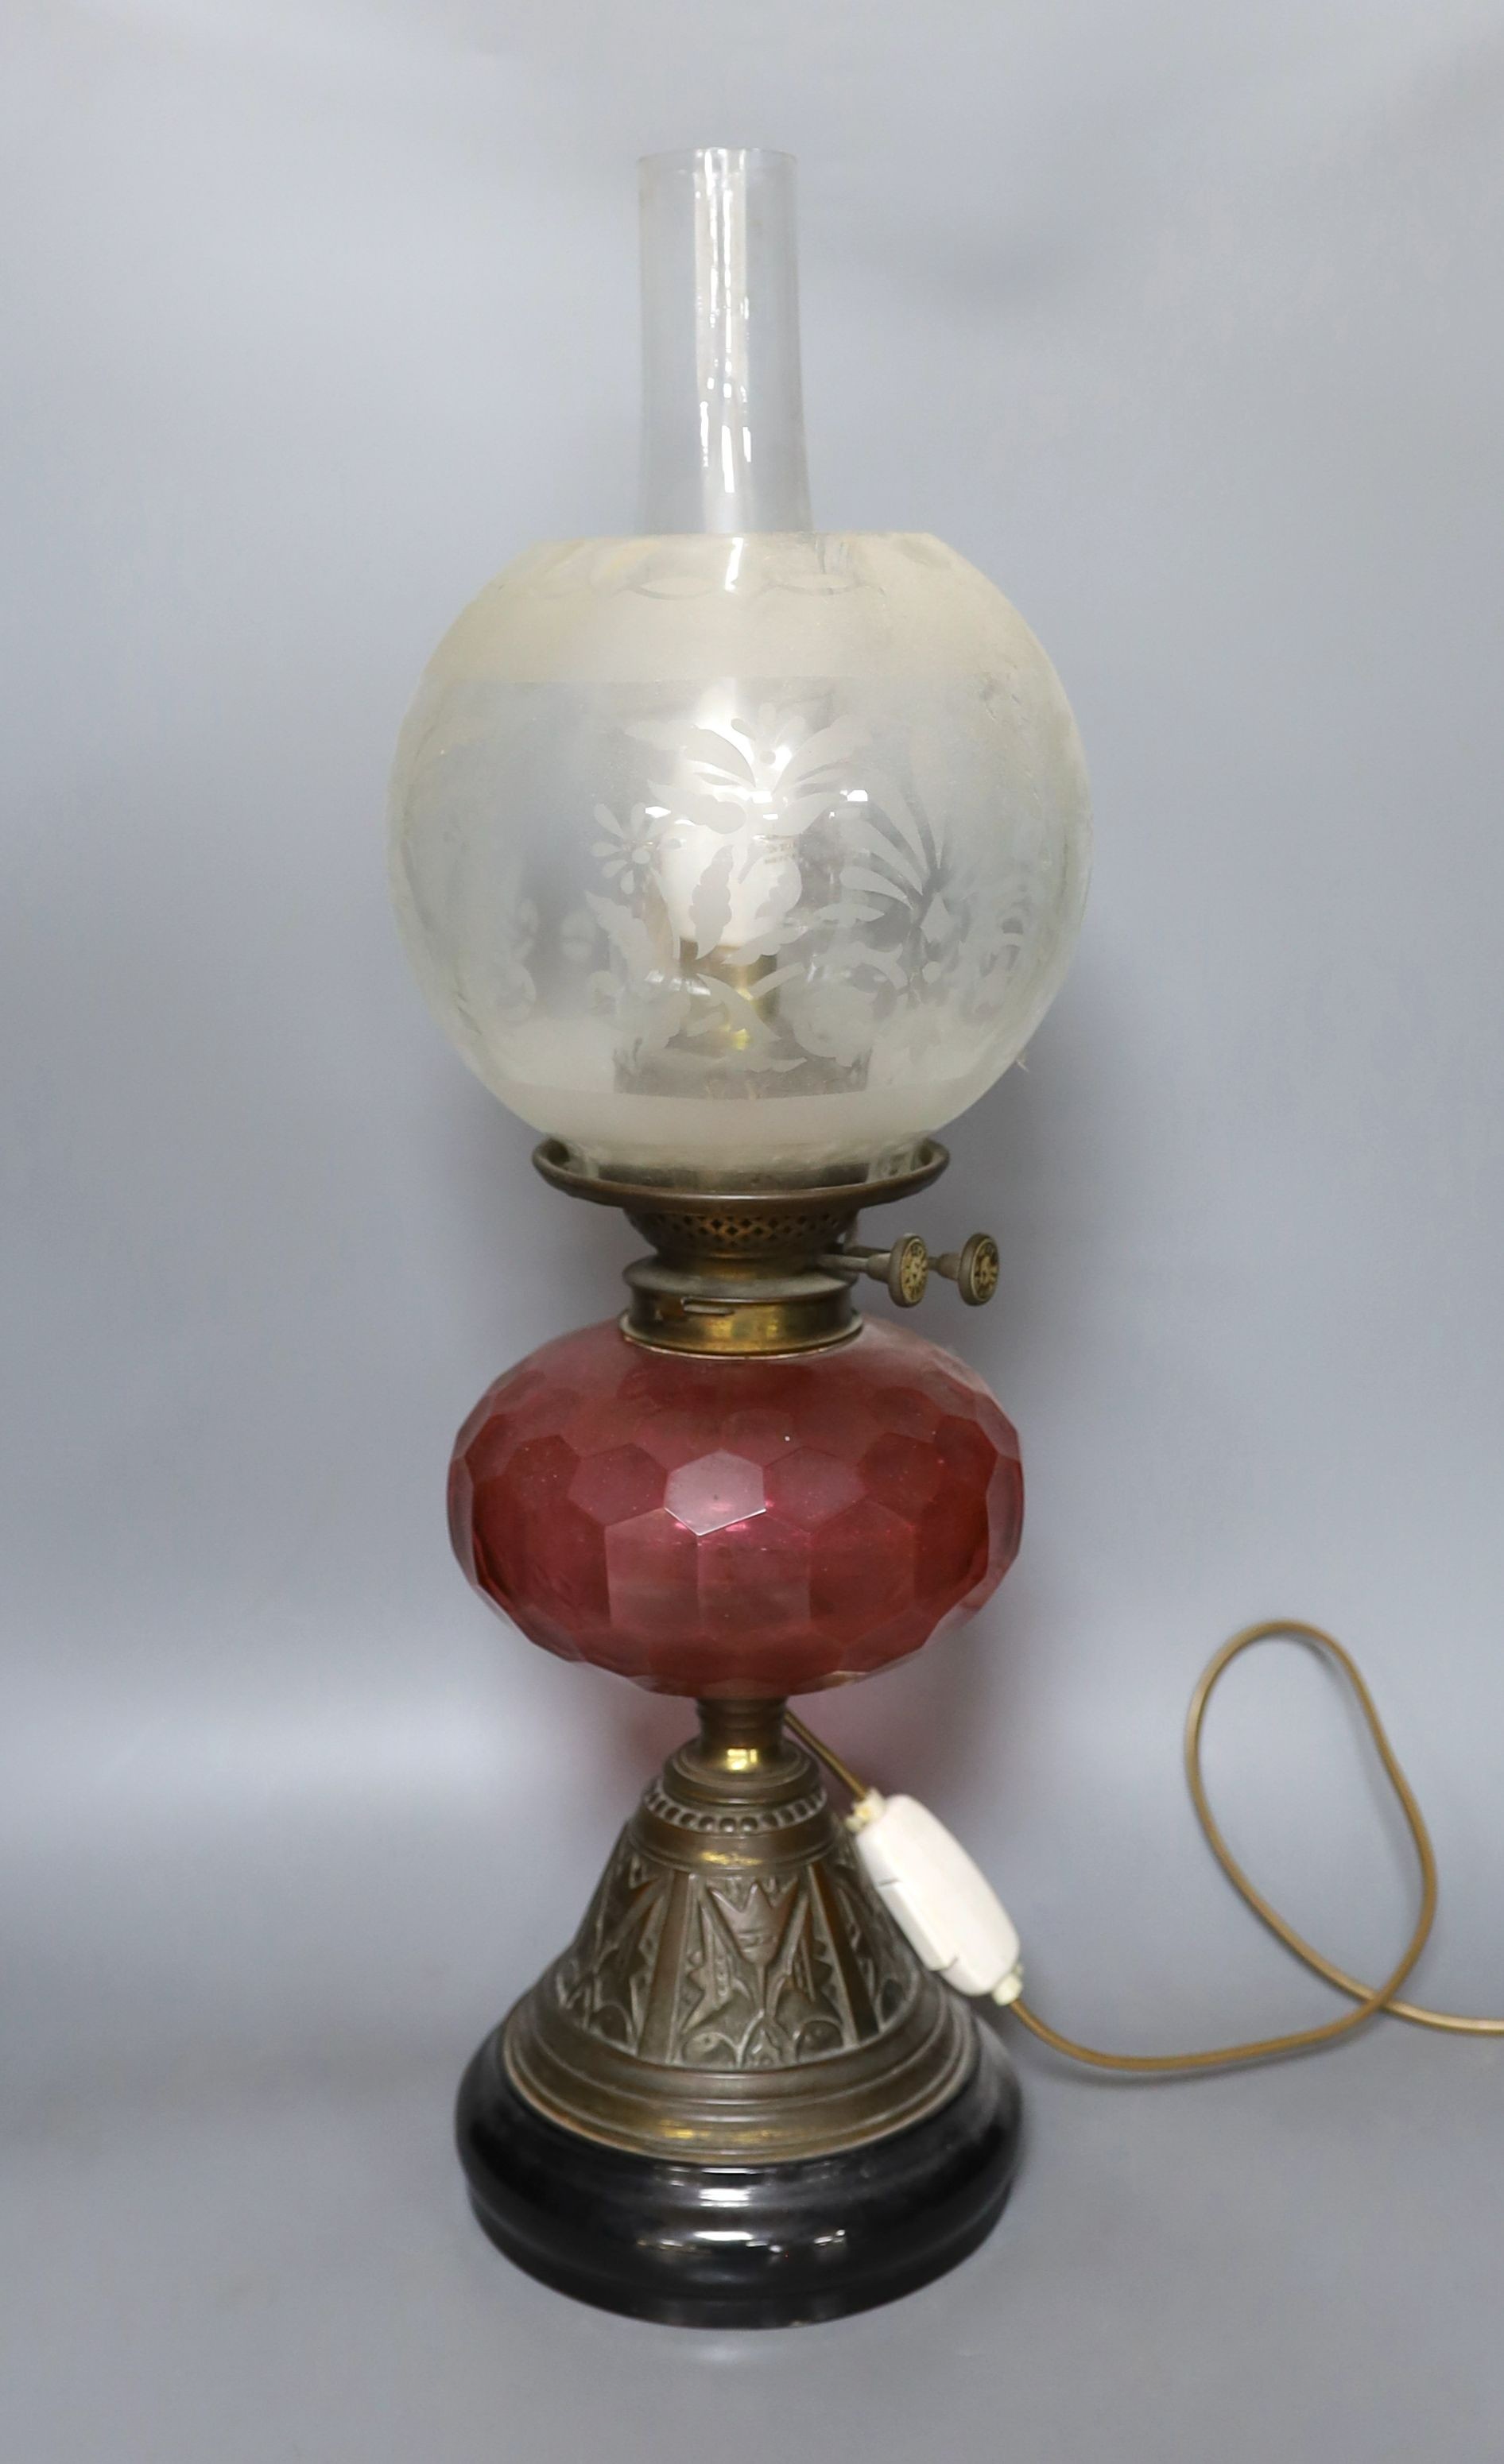 An Edwardian oil lamp with ruby glass font, later inverted to electricity, 57 cms high including funnel.